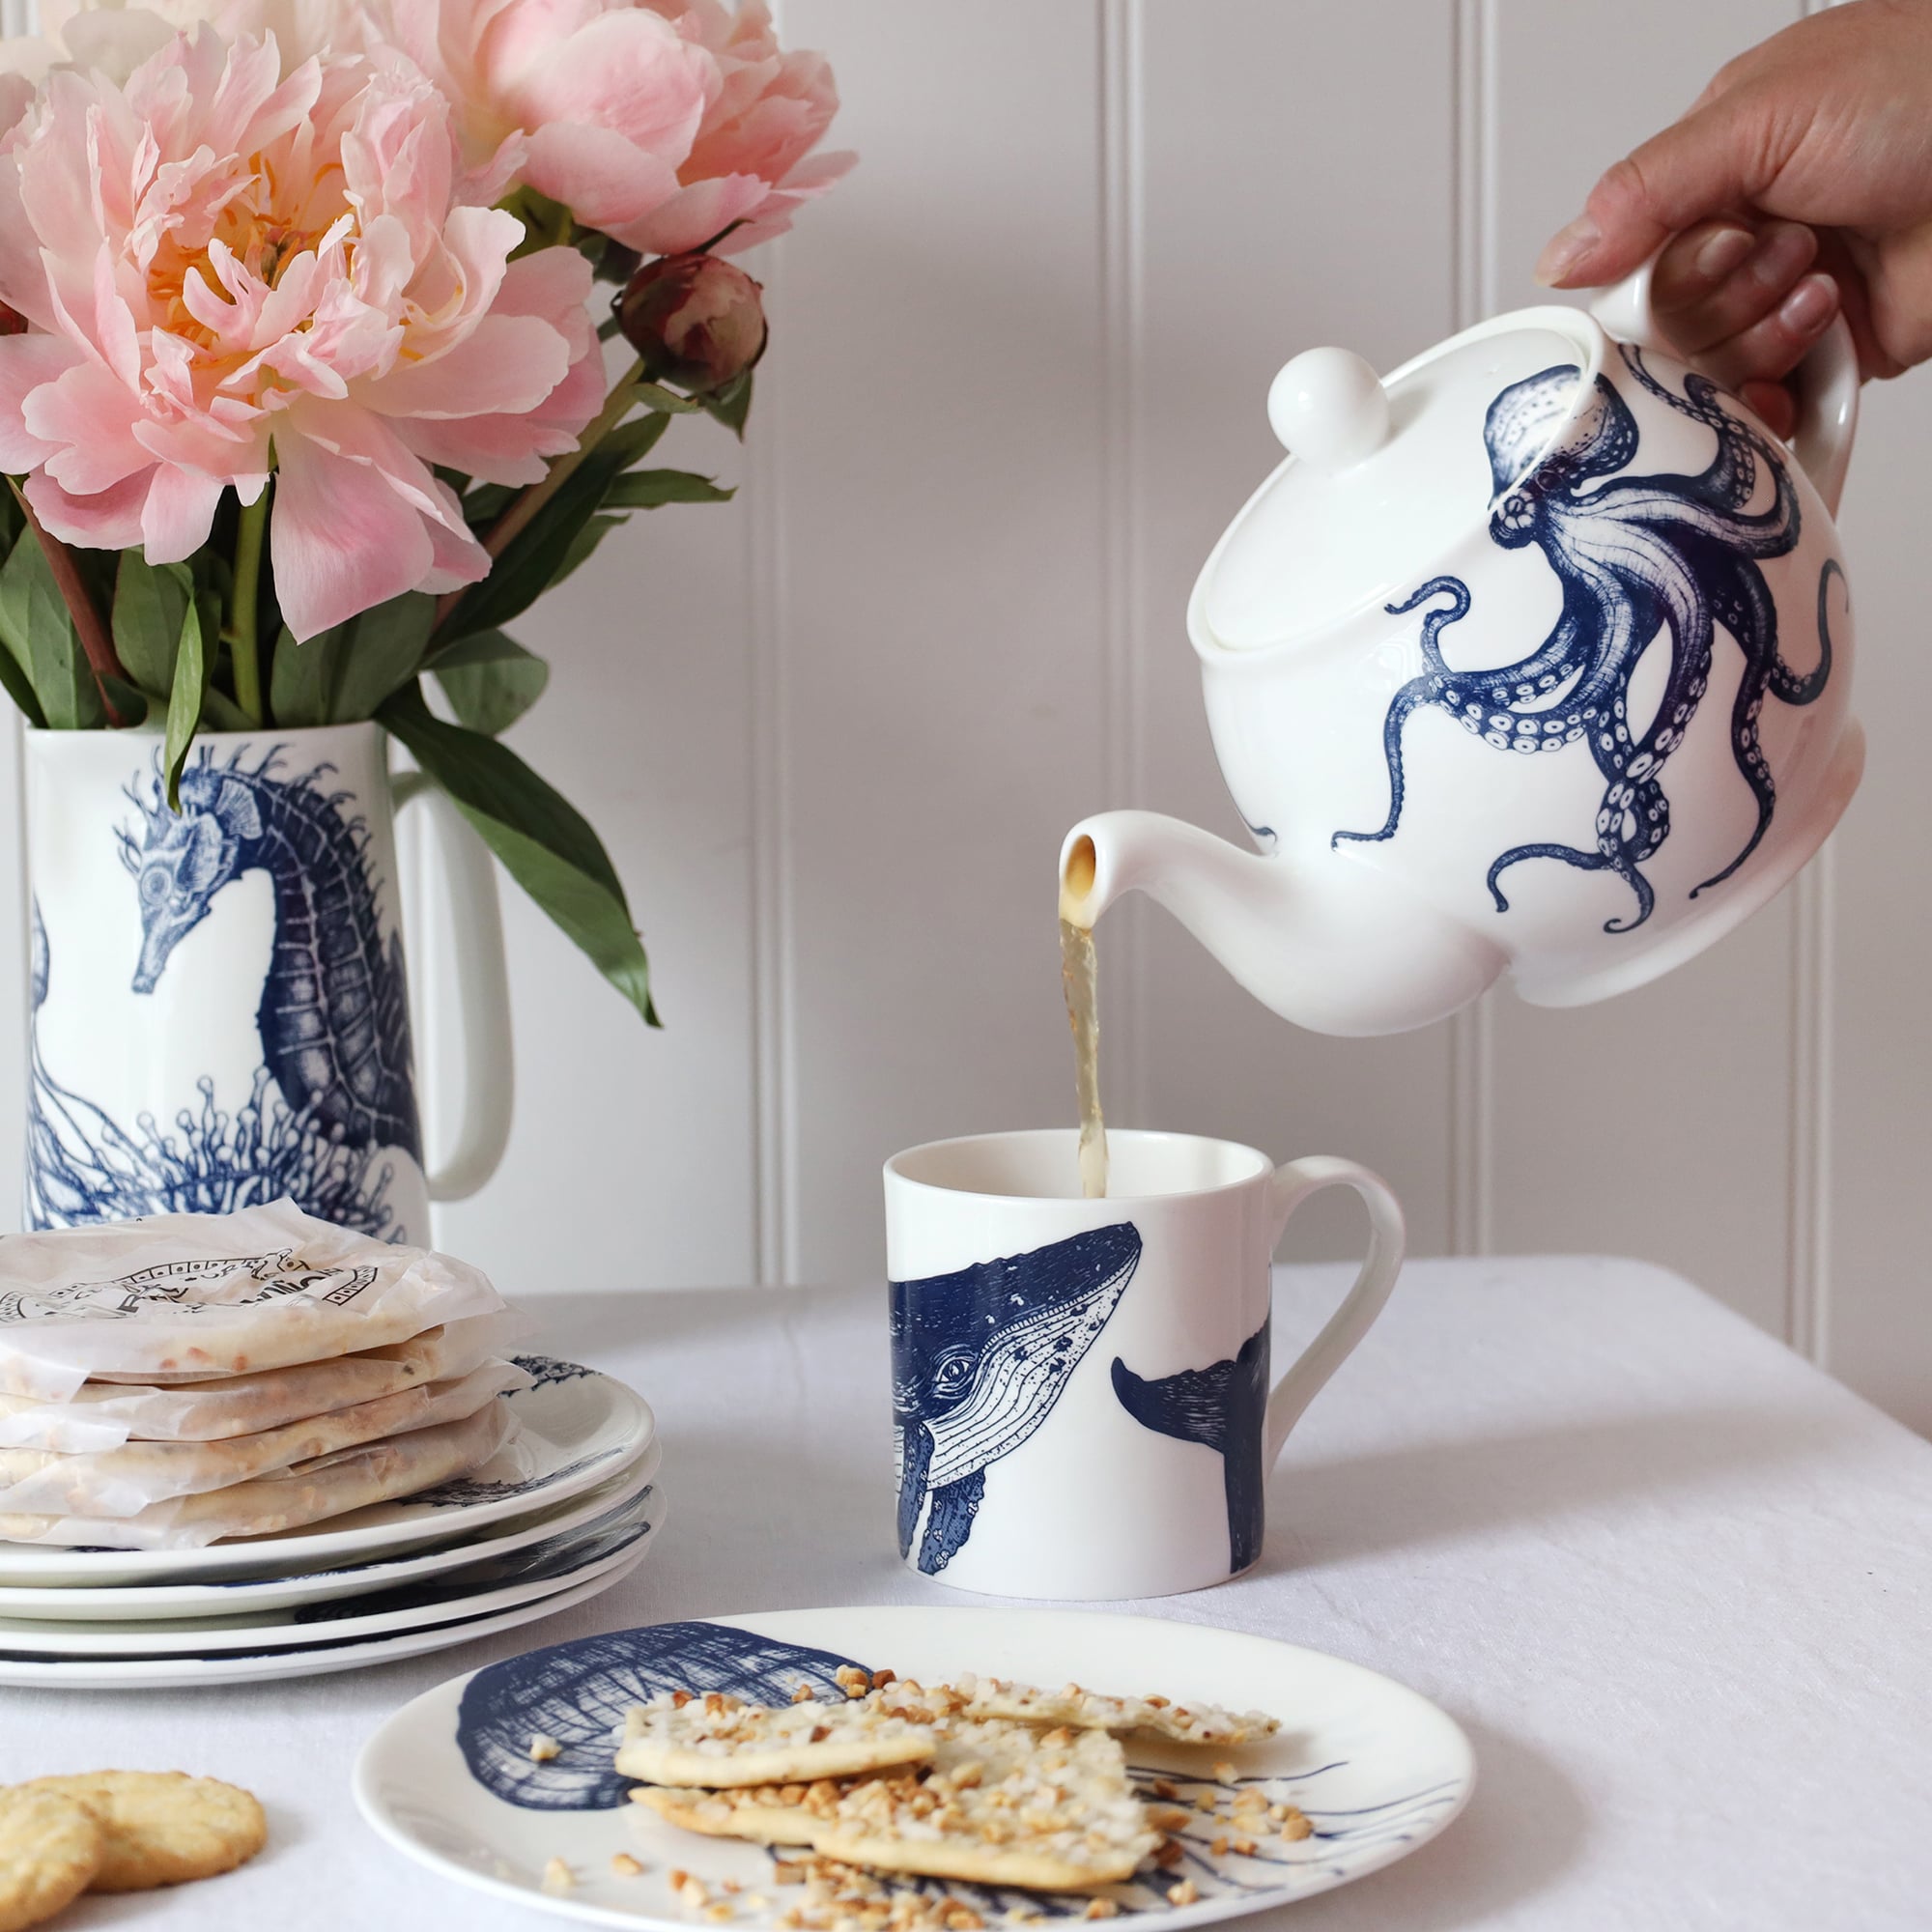 A blue & white informal; table setting set against a white shiplap wall and linen tablecloth. An octopus design adorns a teapot which is pouring tea into a white bone china mug decorated with a blue illustrated humpback whale..